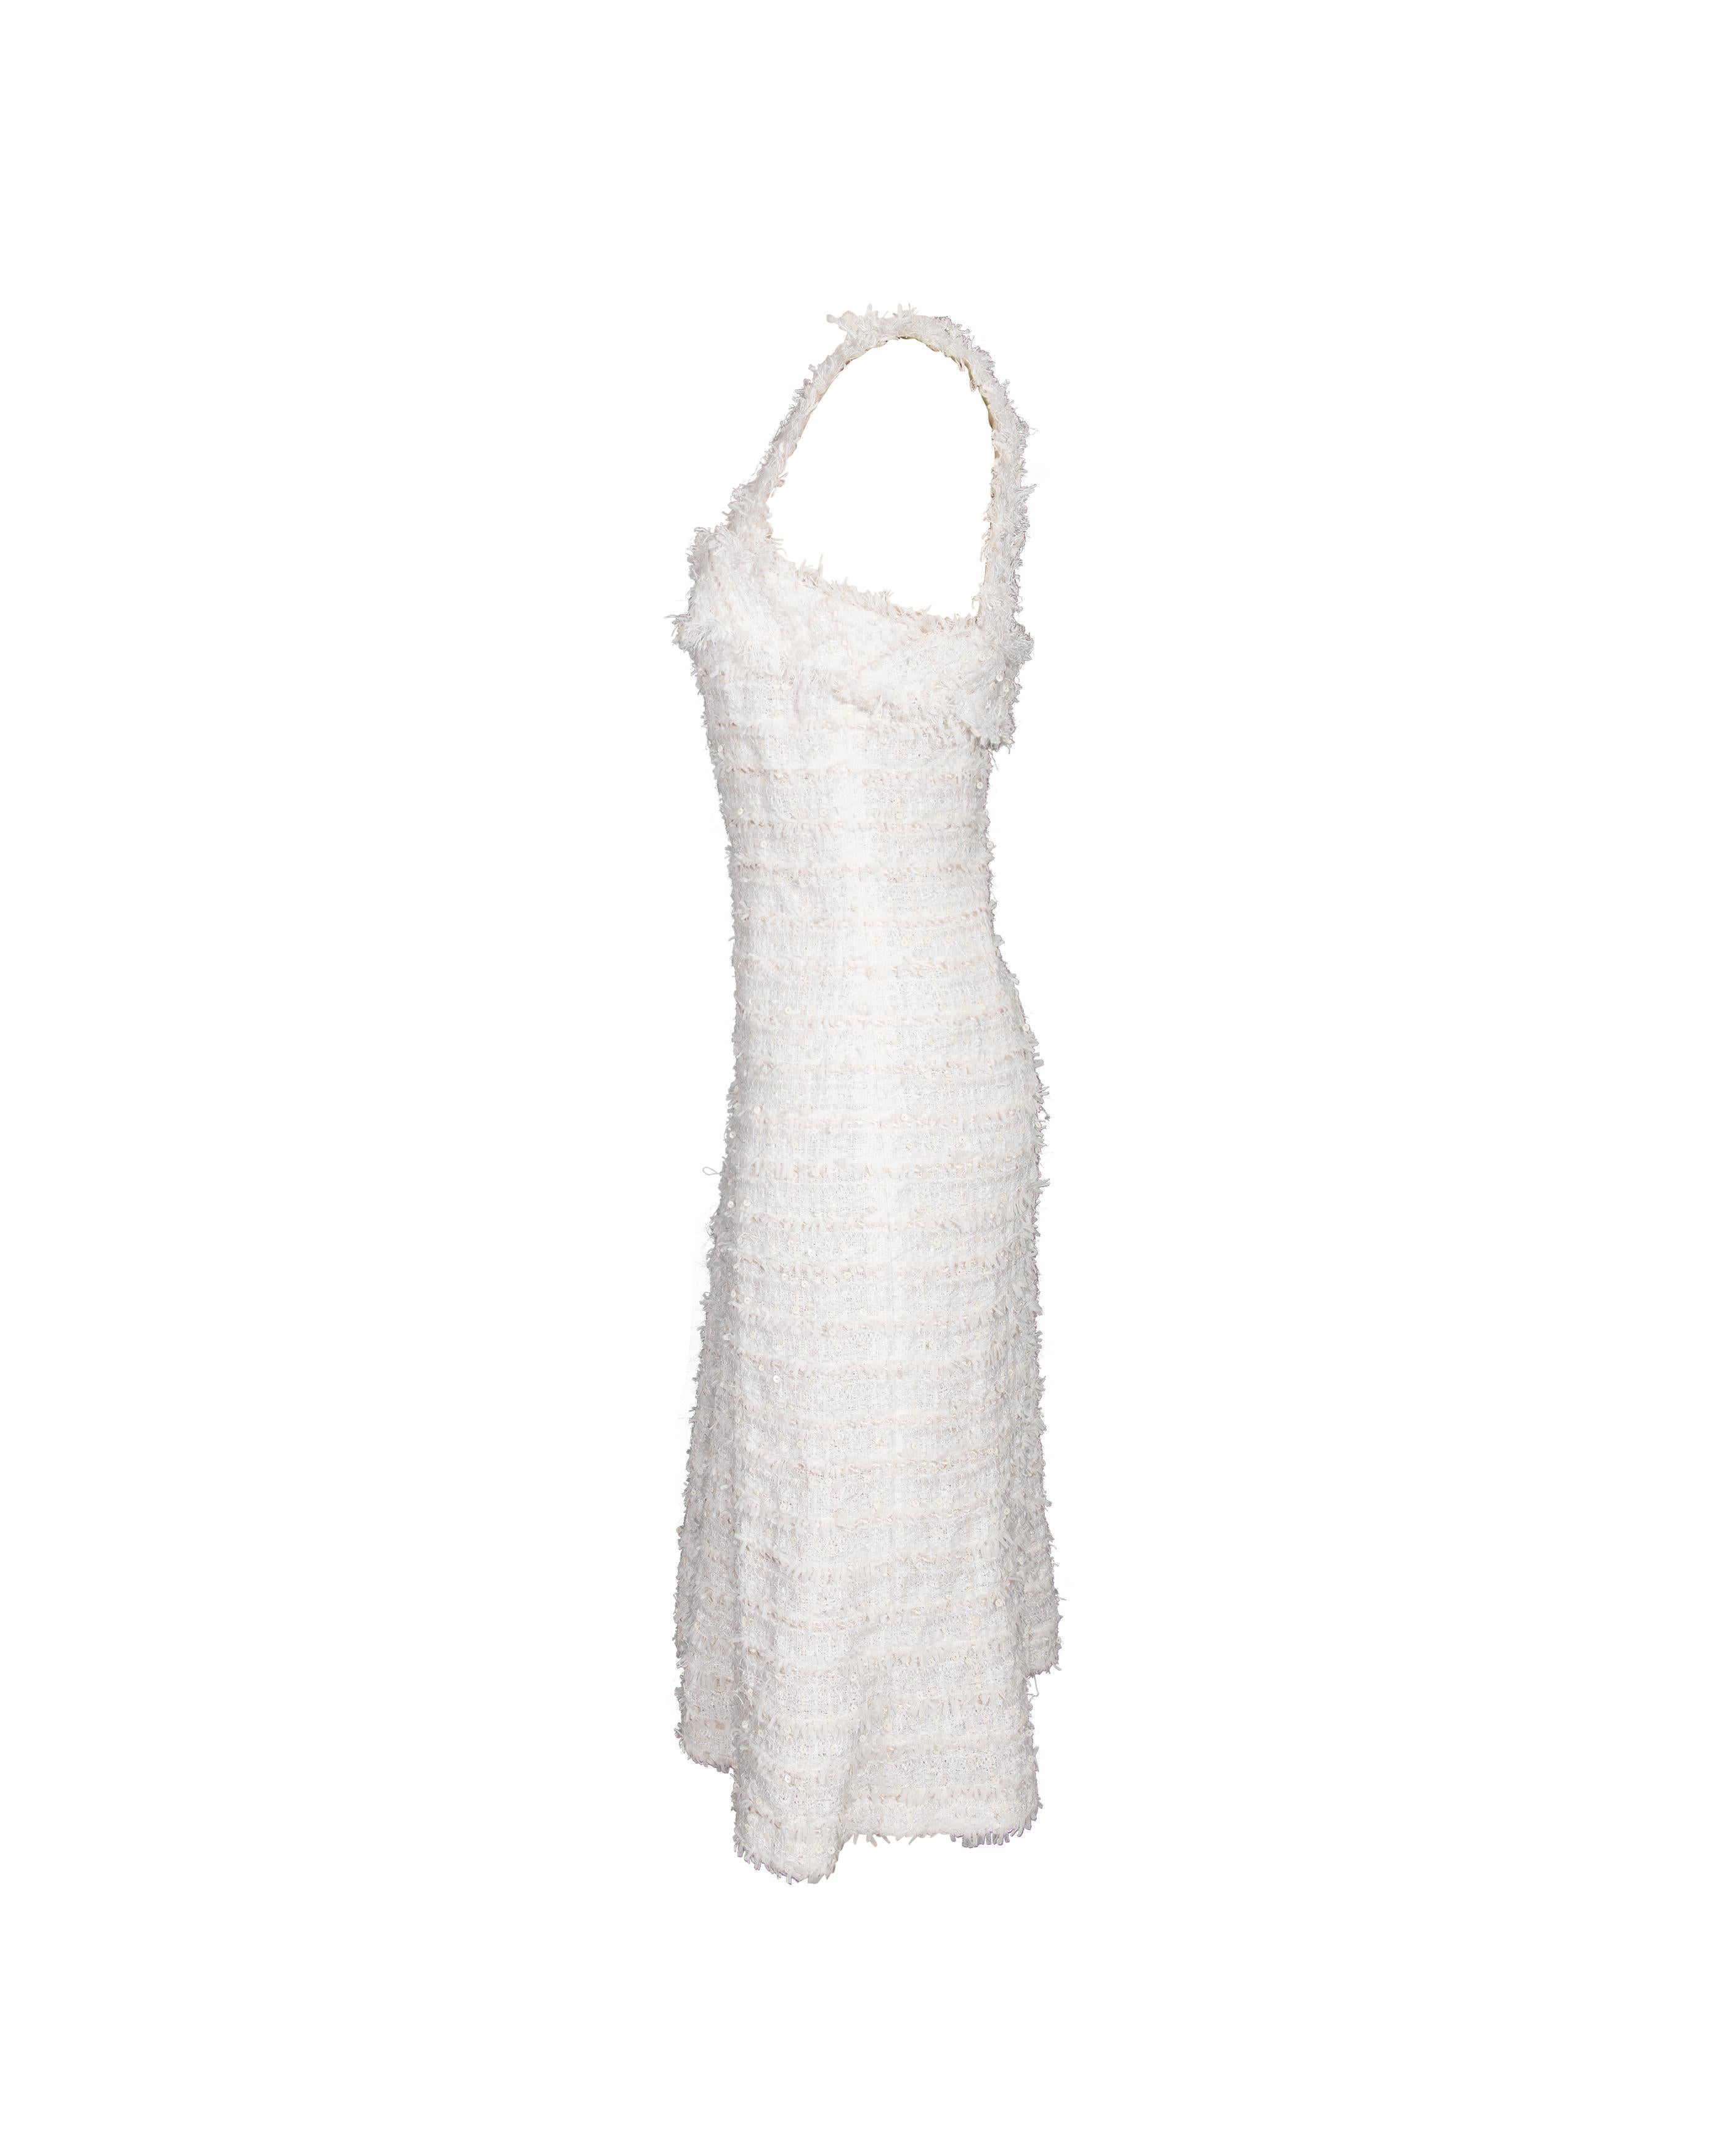 Women's S/S 2005 Chanel by Karl Lagerfeld Metallic White Tweed Above-Knee Dress For Sale